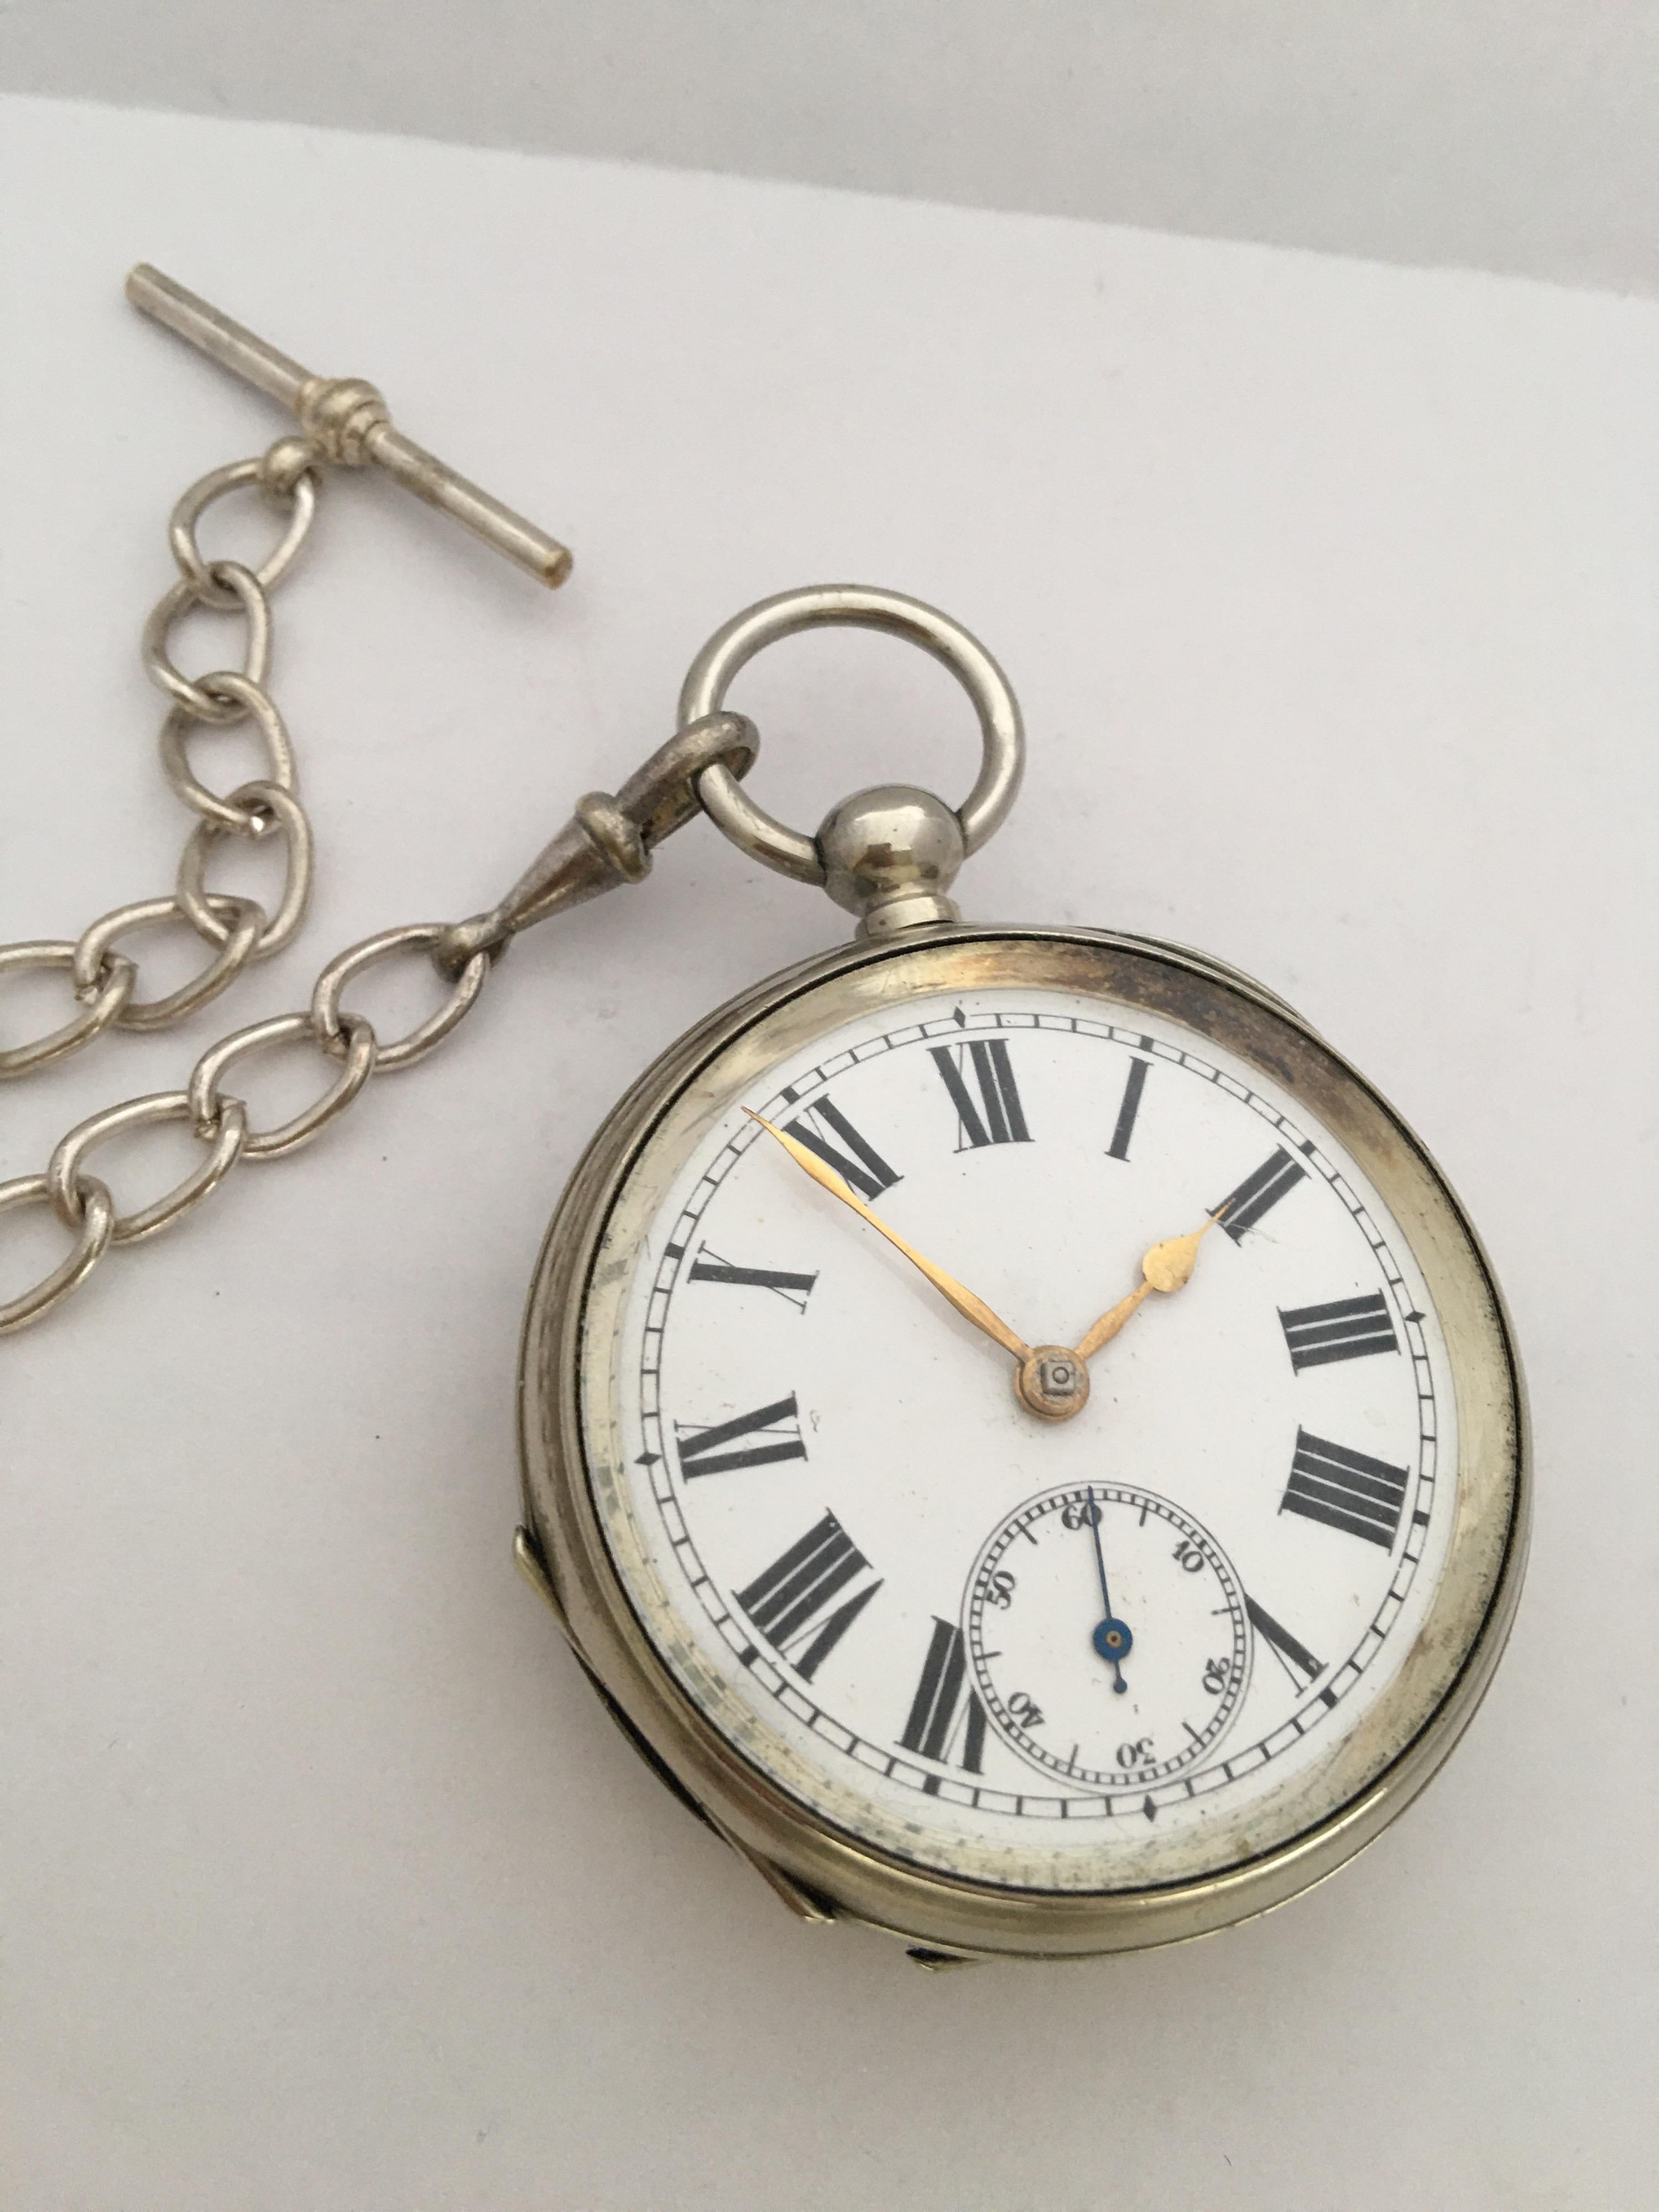 Antique Silver Plated Key-Winding Pocket Watch with a Chain 5